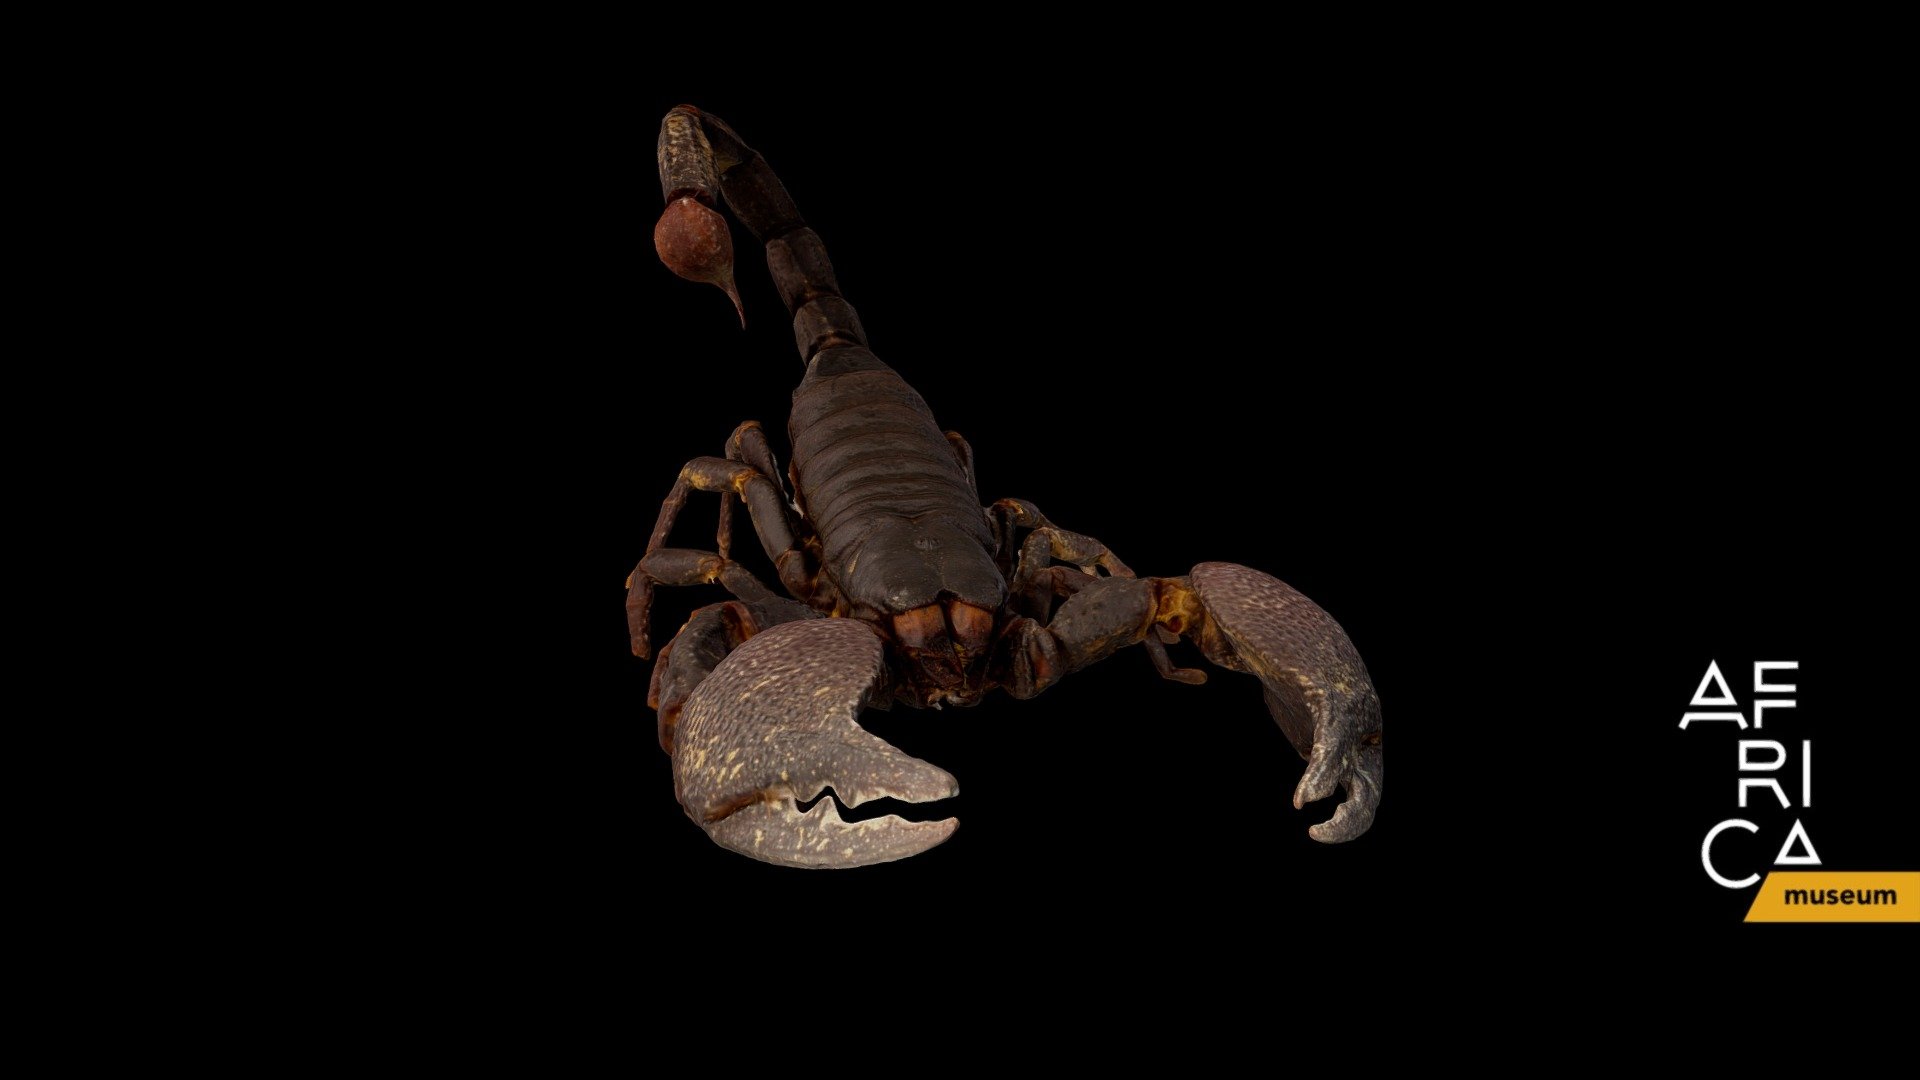 Scorpionidae

Pandinus imperator (Koch, 1842)

N°: RMAC_ARA_245959

Prov.: Côte d'Ivoire

Photogrammetry model A. Mathys ©RMCA 2016

http://www.africamuseum.be/home - Pandinus imperator - 3D model by Royal Museum for Central Africa (@africamuseum) 3d model